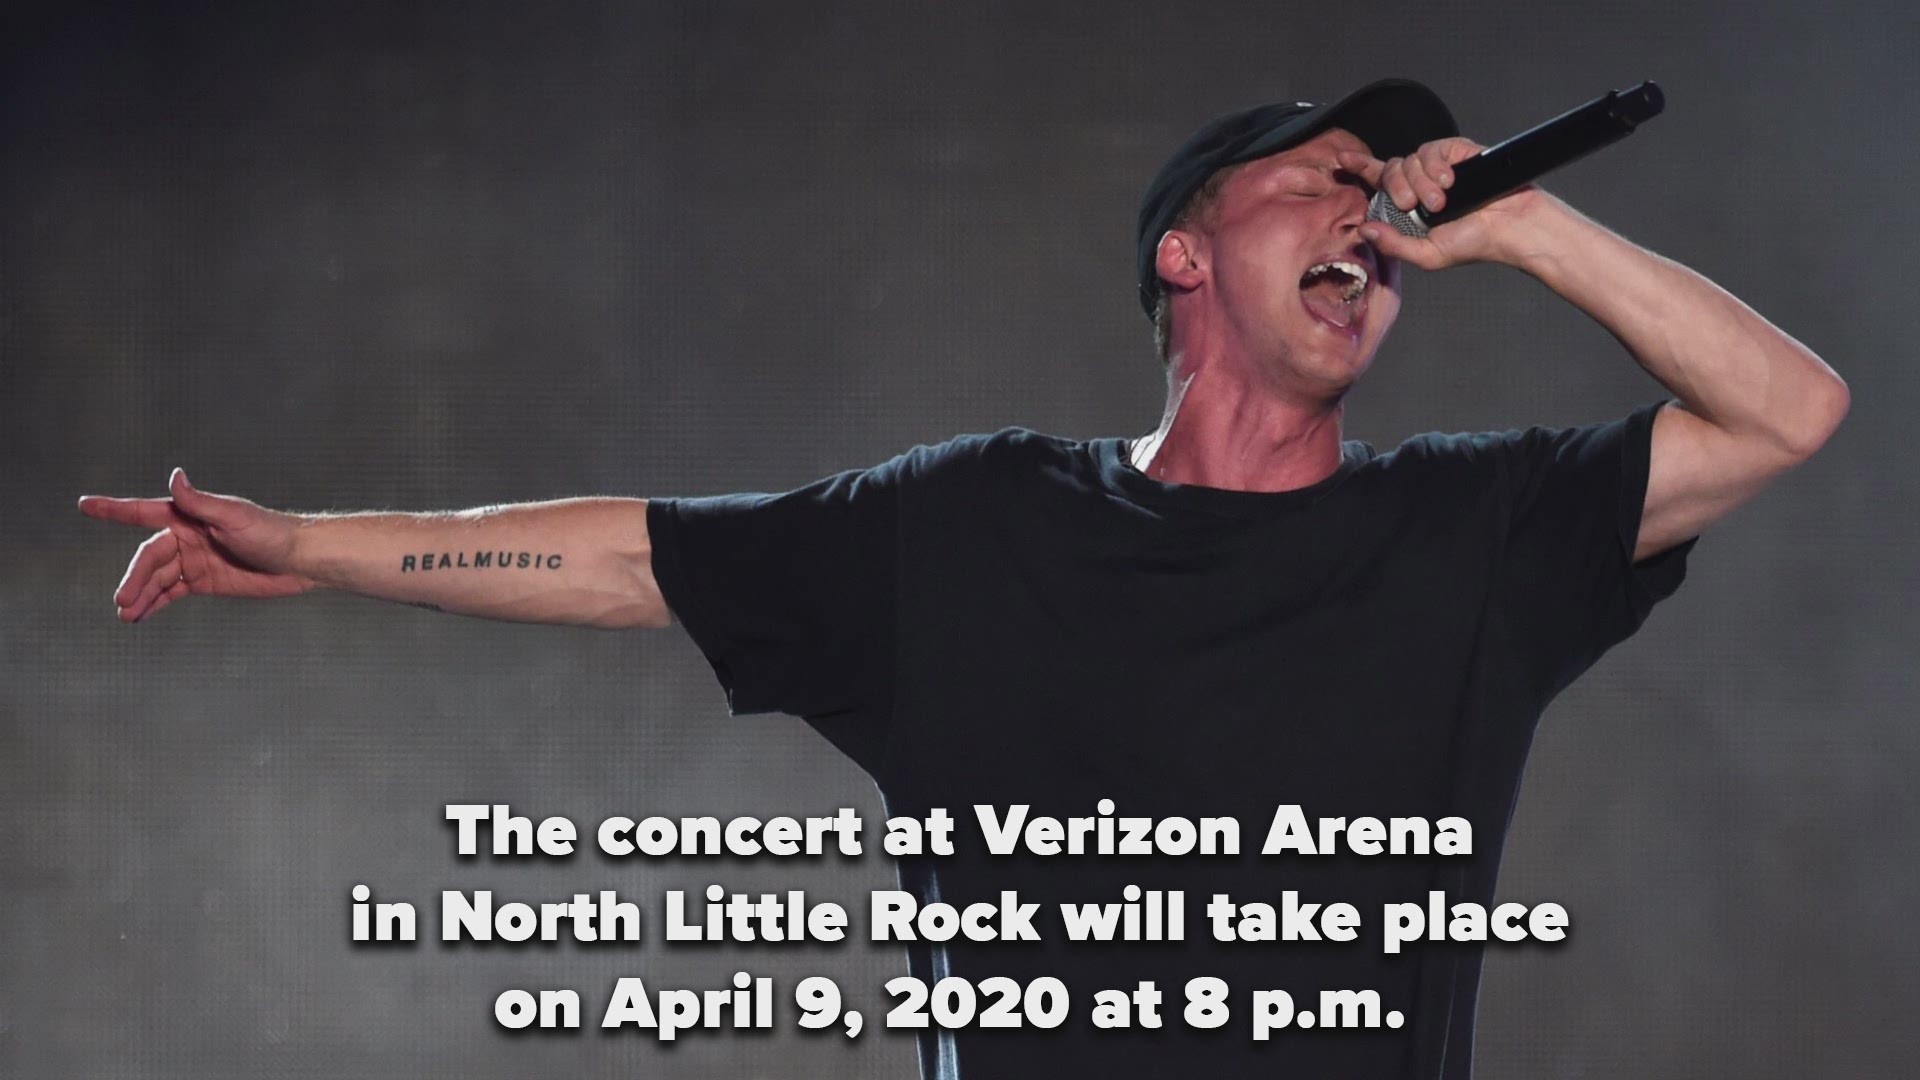 The concert at Verizon Arena in North Little Rock will take place on April 9, 2020 at 8 p.m.